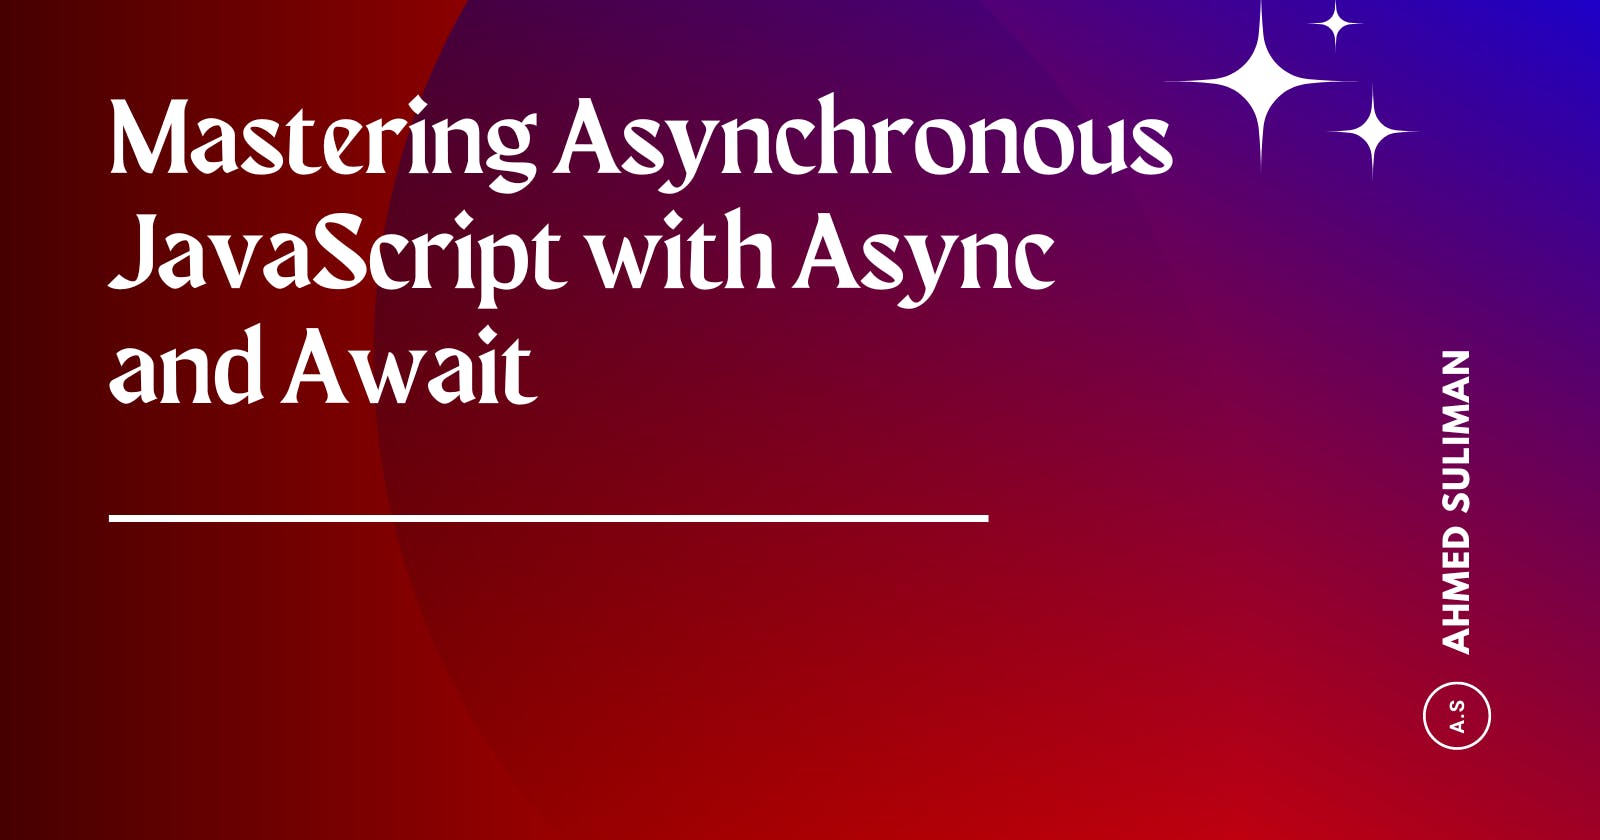 Mastering Asynchronous JavaScript with Async and Await